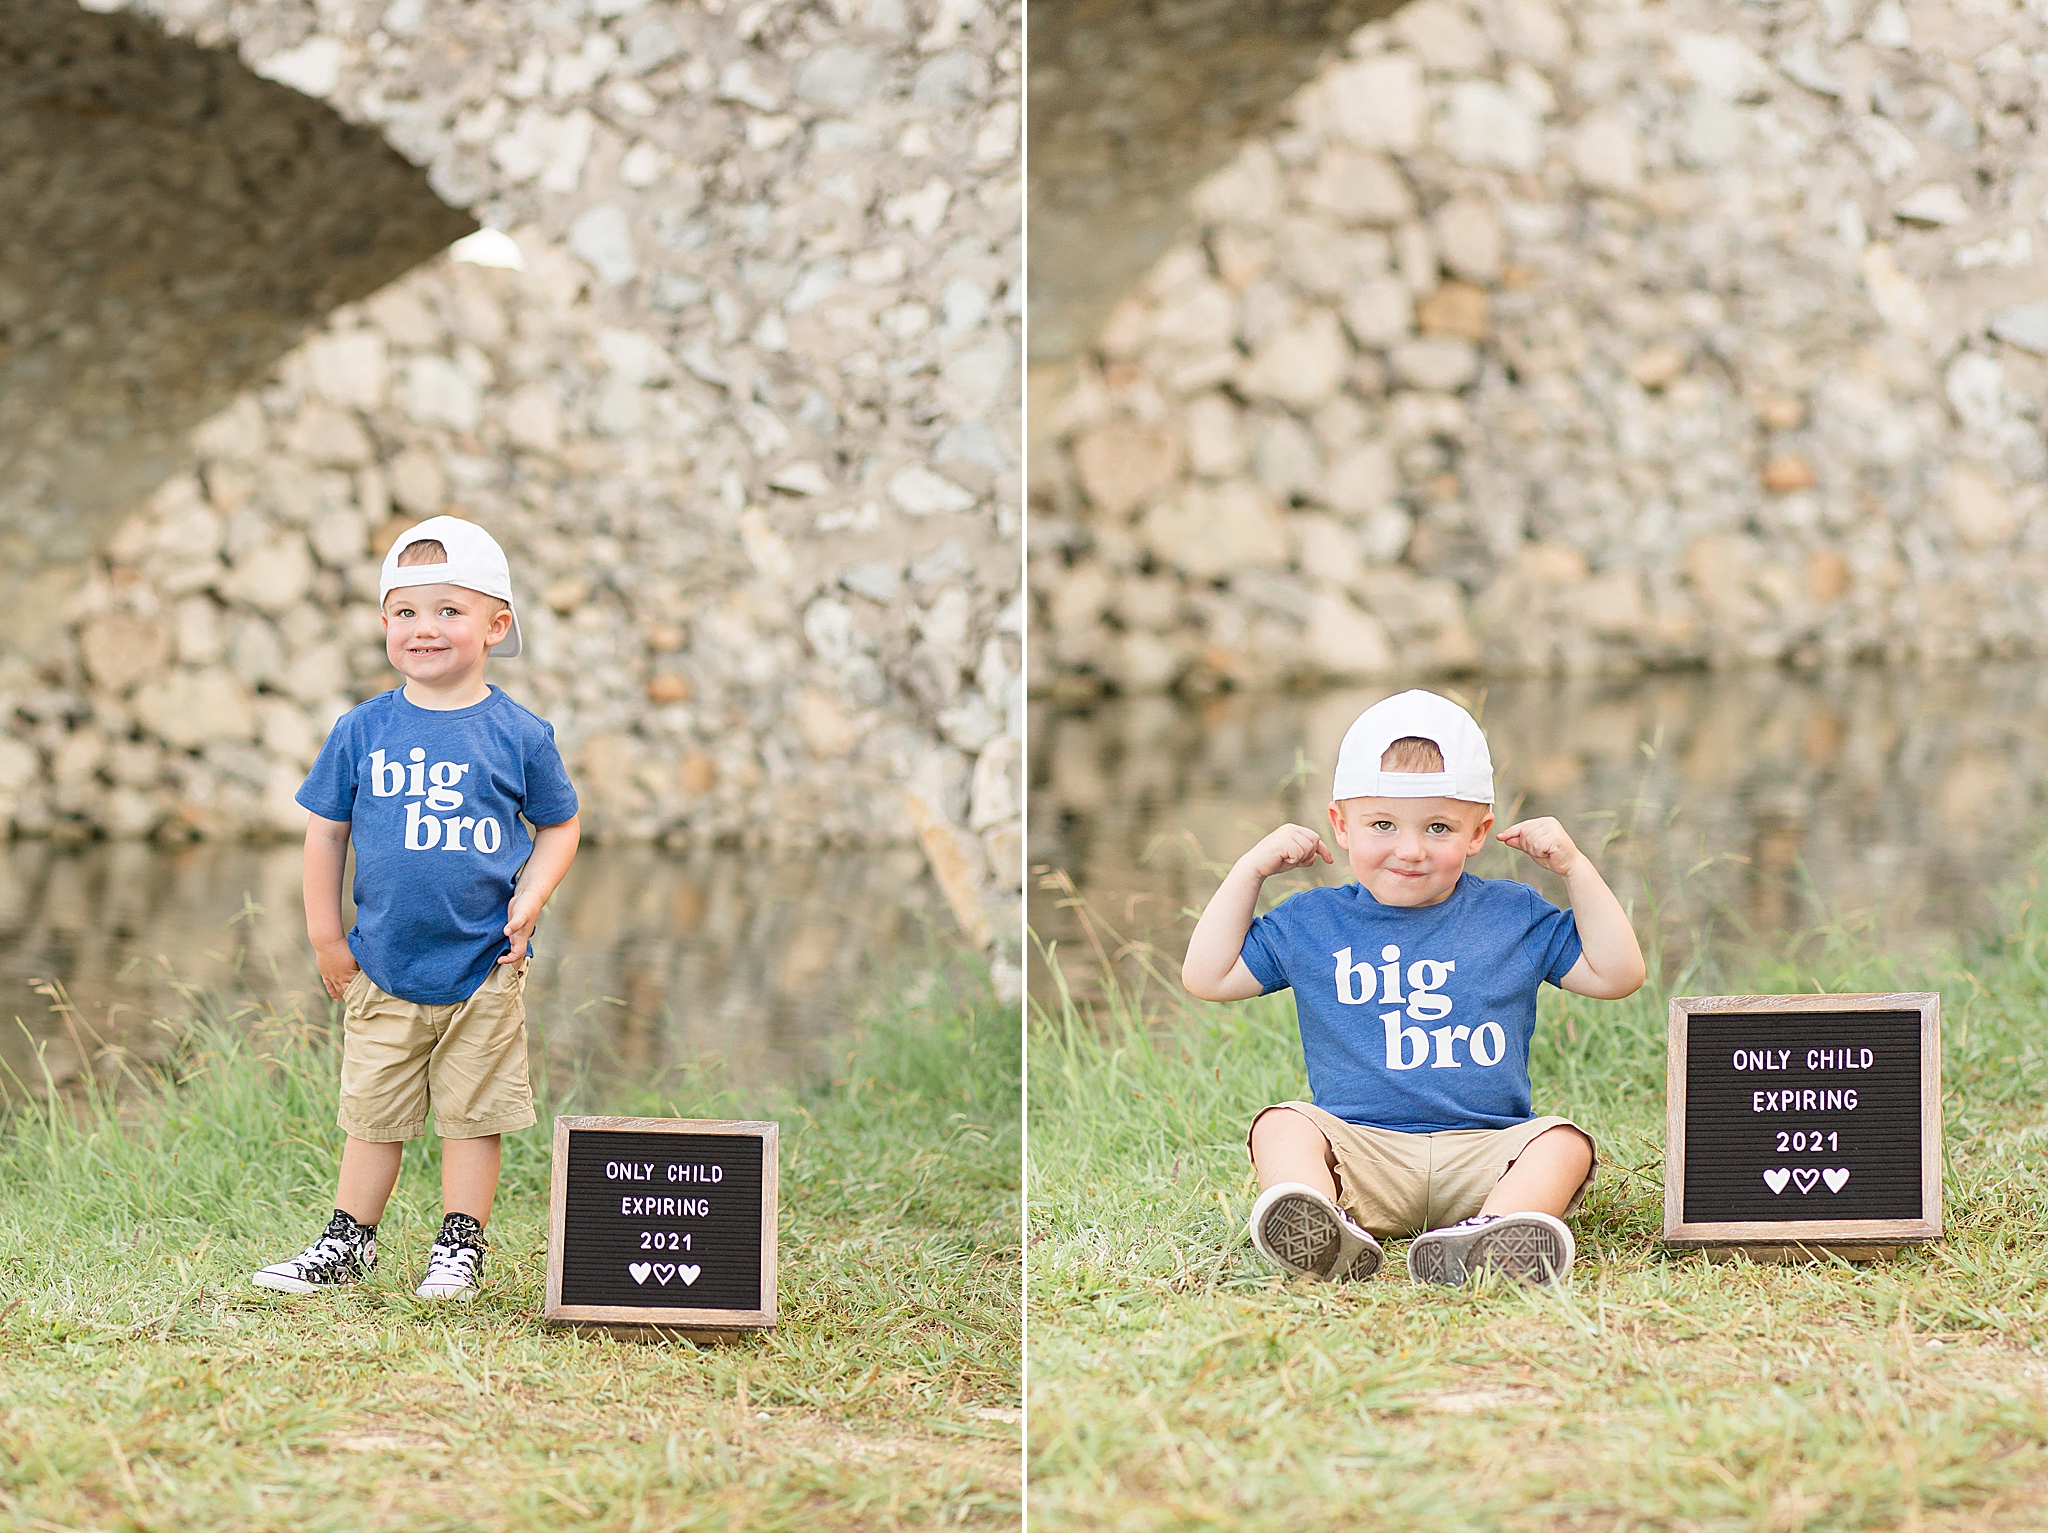 toddler shows off big bro shirt during McKinney family portraits